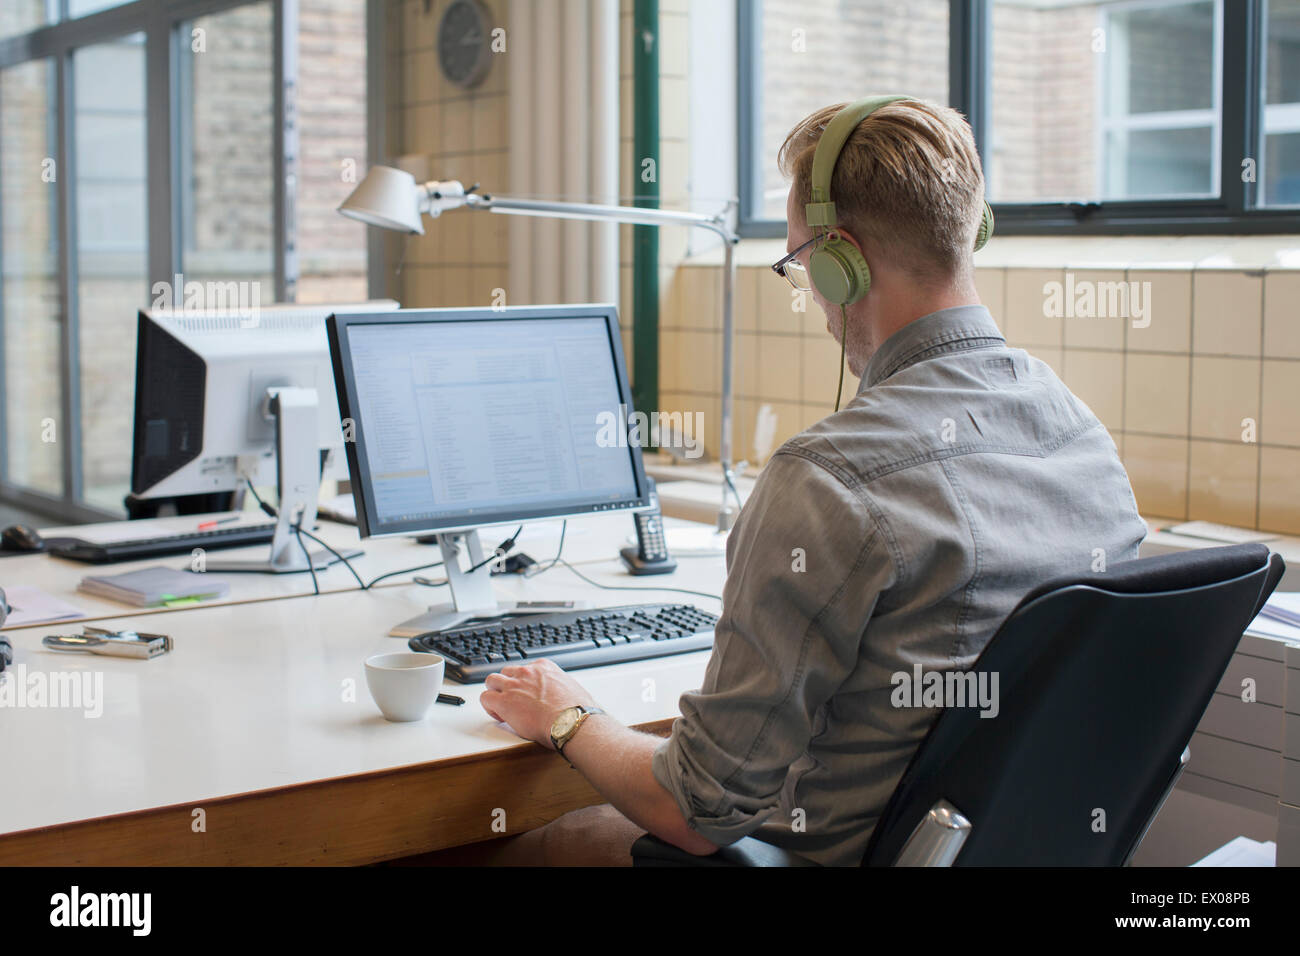 Rear view of man listening to headphones whilst working at office desk Stock Photo